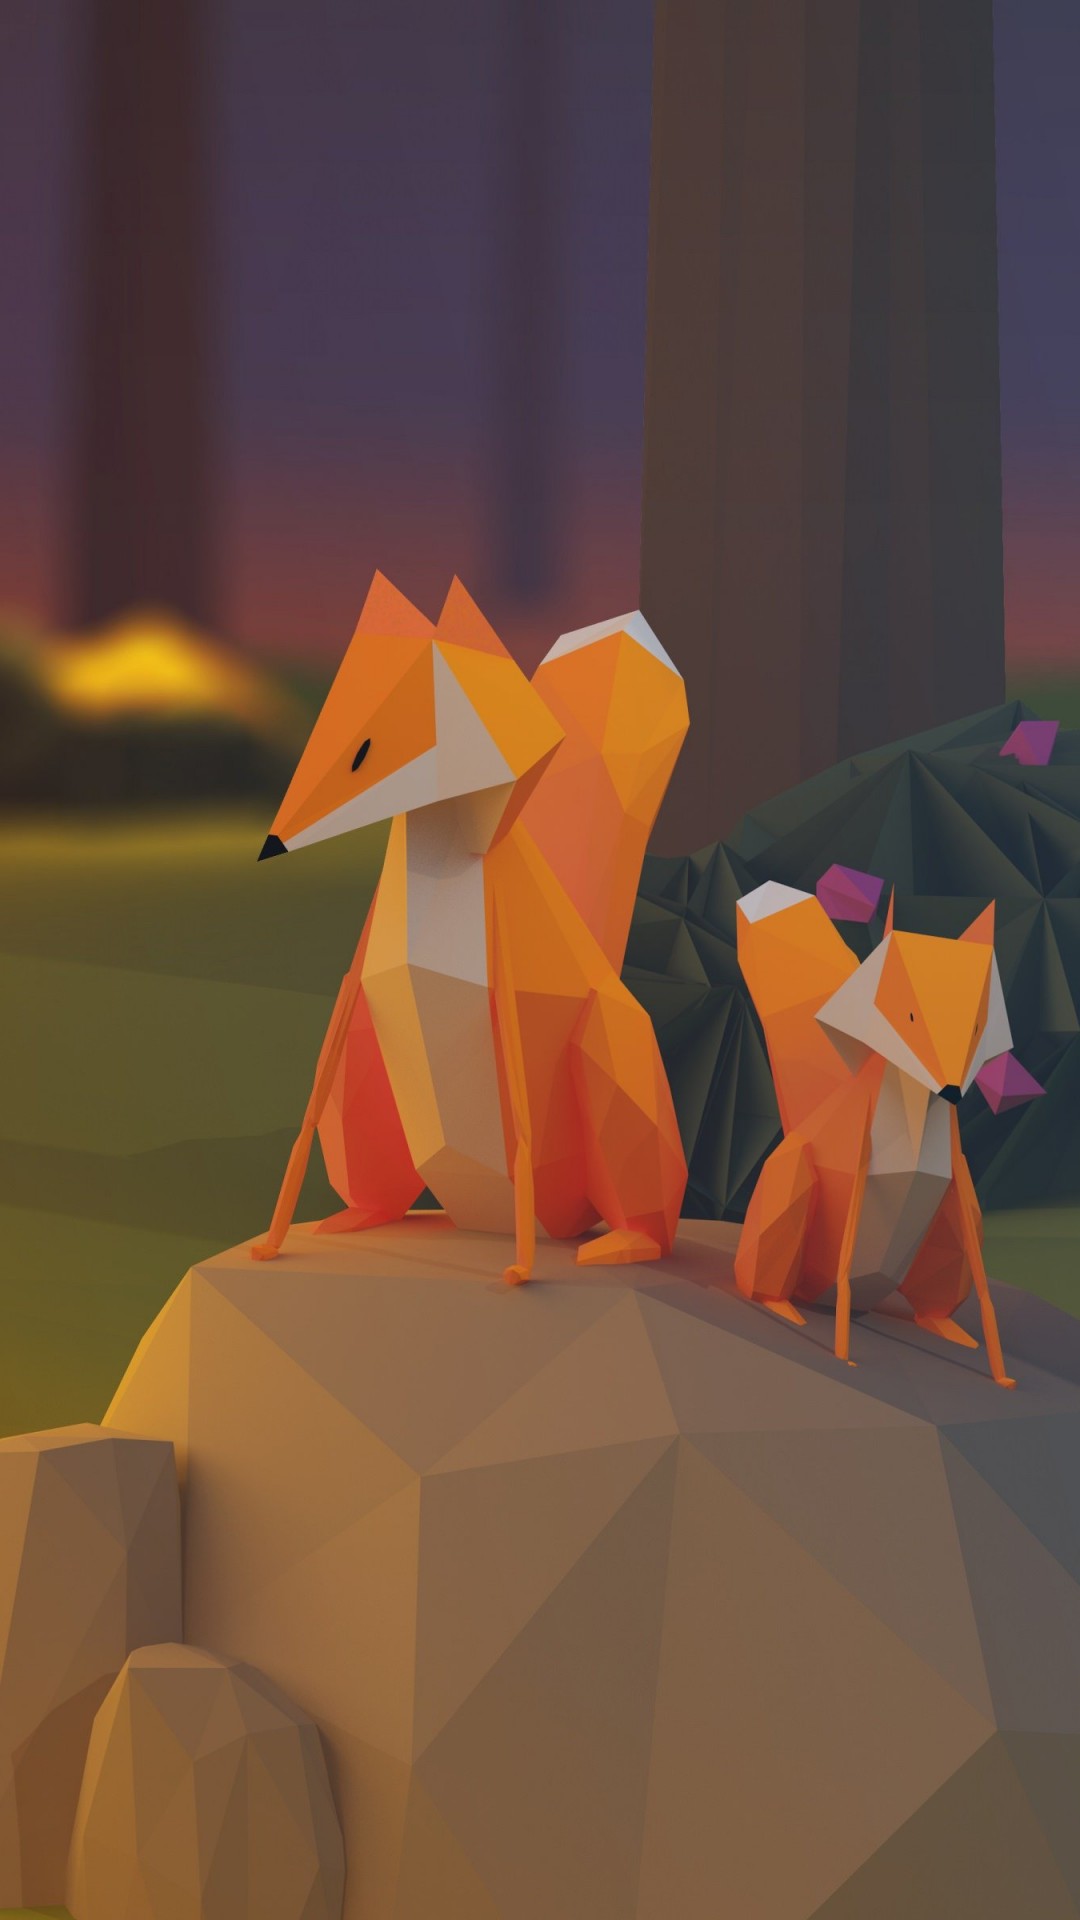 Low Poly Foxes Wallpaper for LG G2